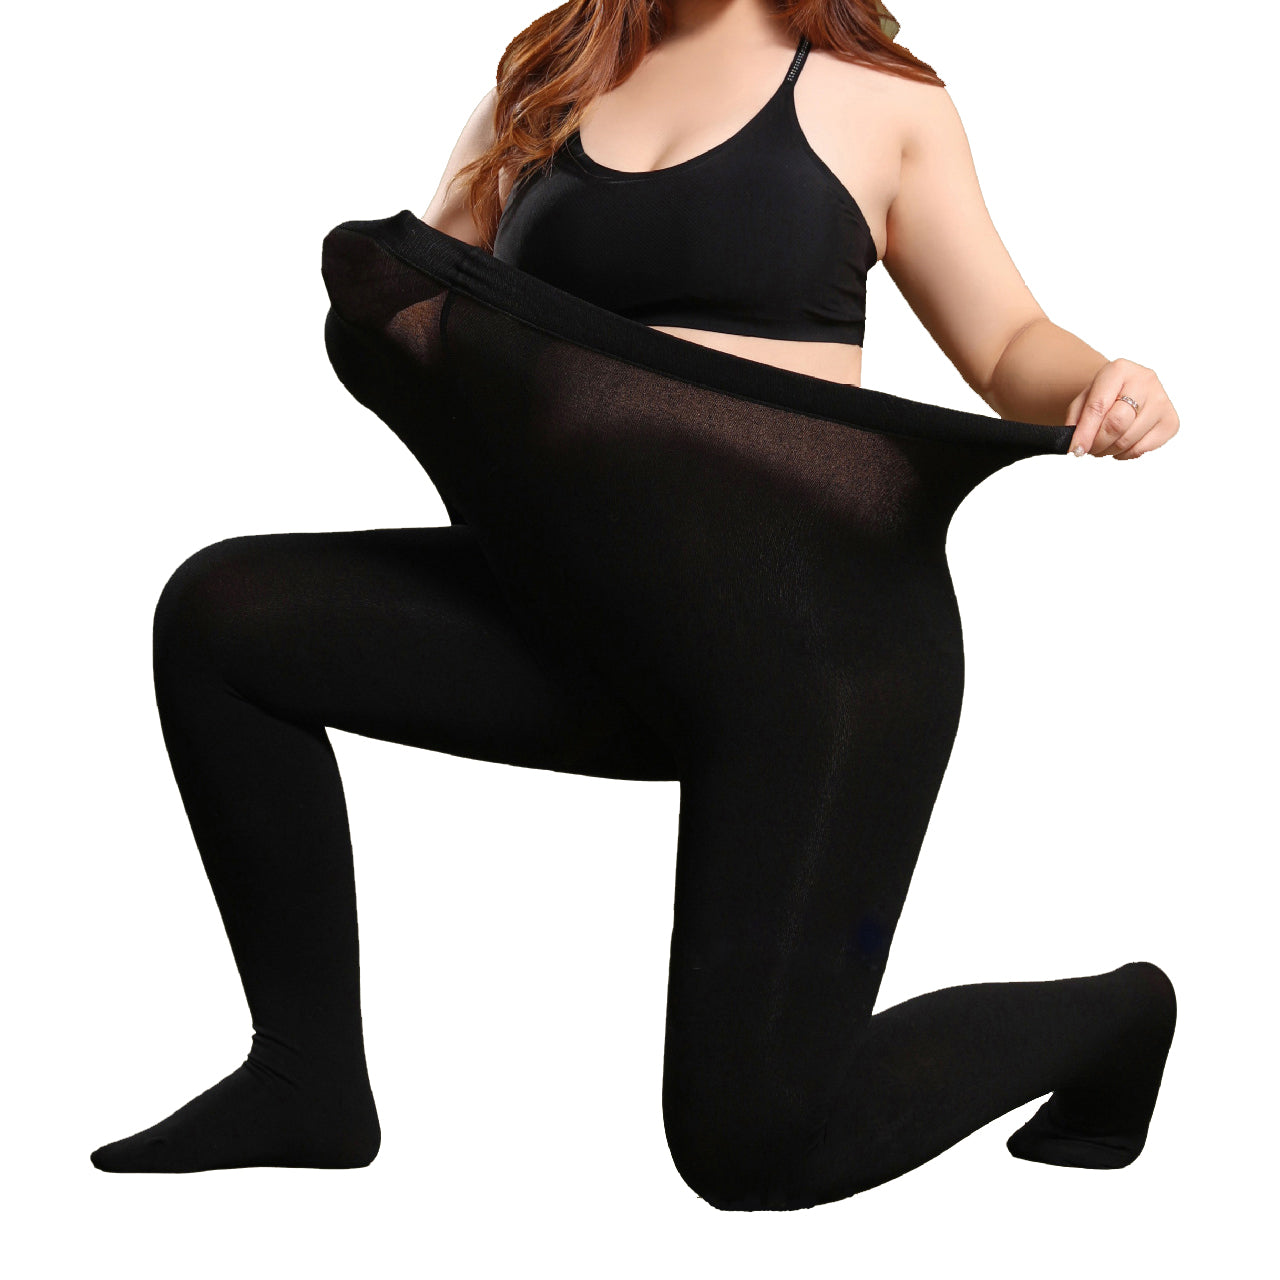 Women's Plus Size Thermal Tights - 400g